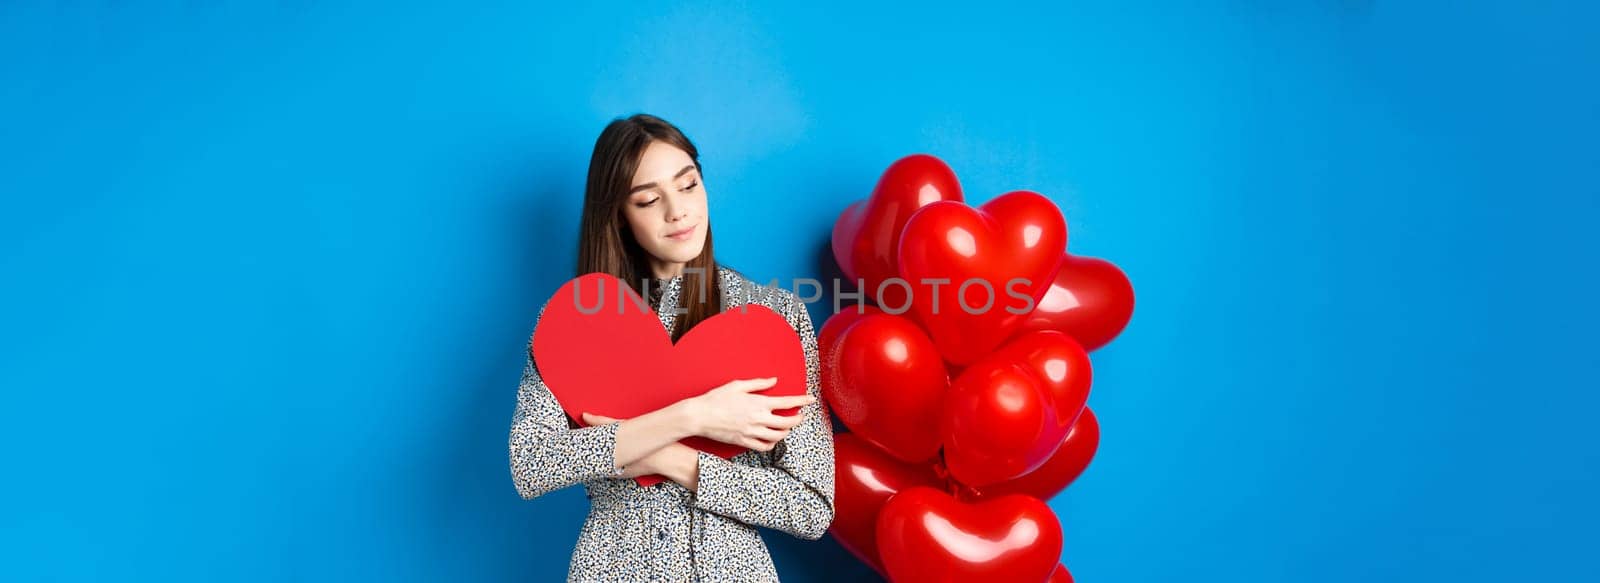 Valentines day. Romantic pretty woman in dress hugging big red heart cutout and looking dreamy, thinking of love, standing on blue background.